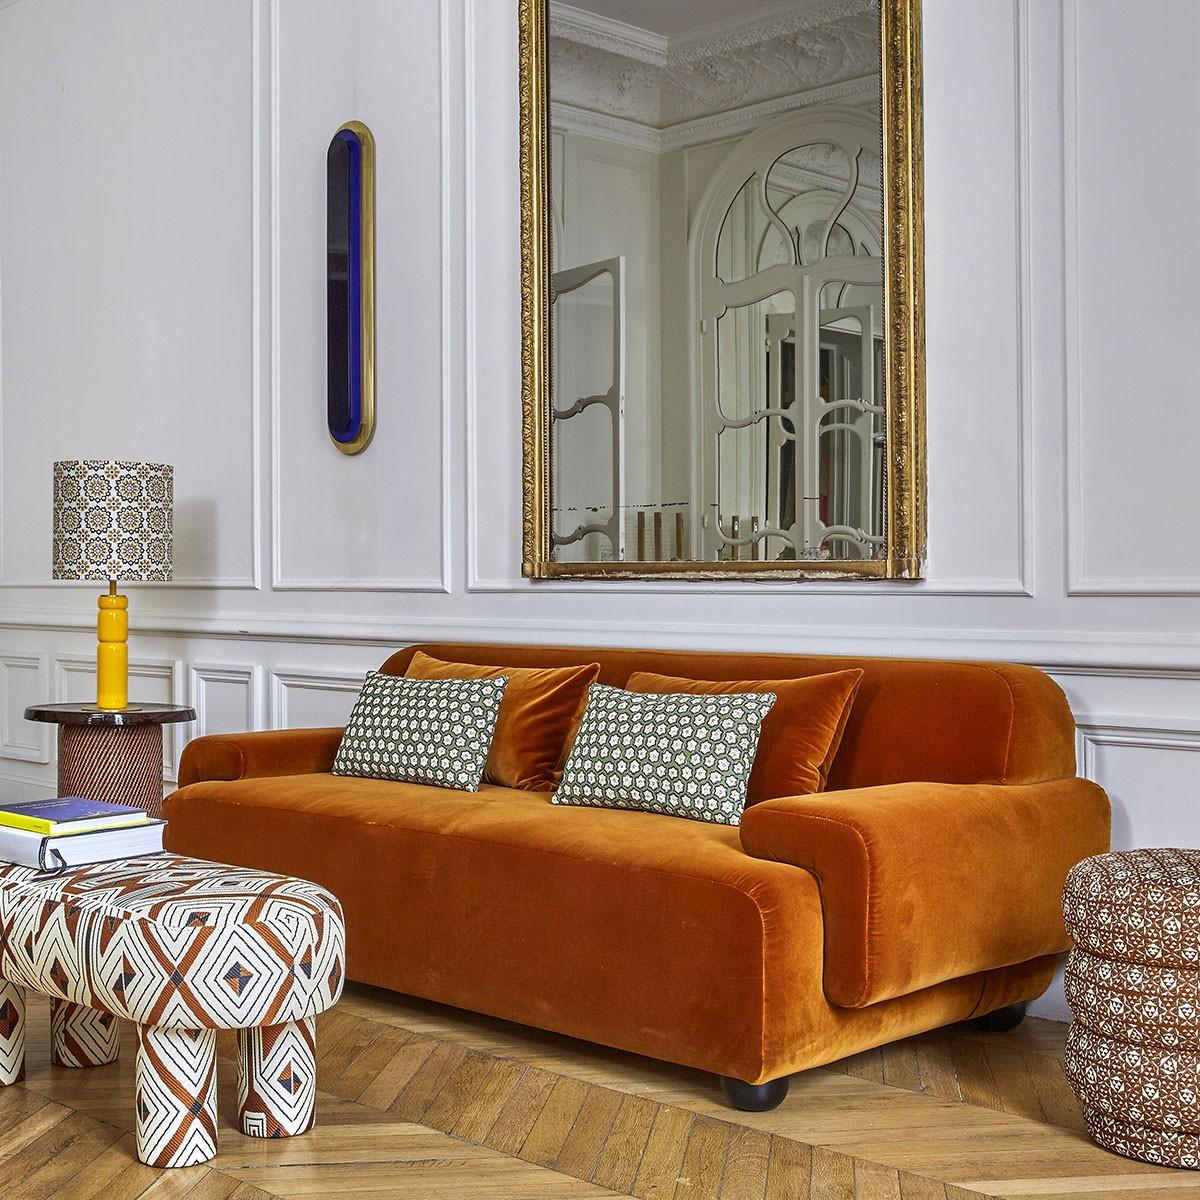 Popus Editions Lena 3 Seater Sofa in Brown Verone Velvet Upholstery

It looks like it's straight out of a movie, with its generous curves and wide armrests. It is a real invitation to spend long Sundays with the family, comfortably seated in front